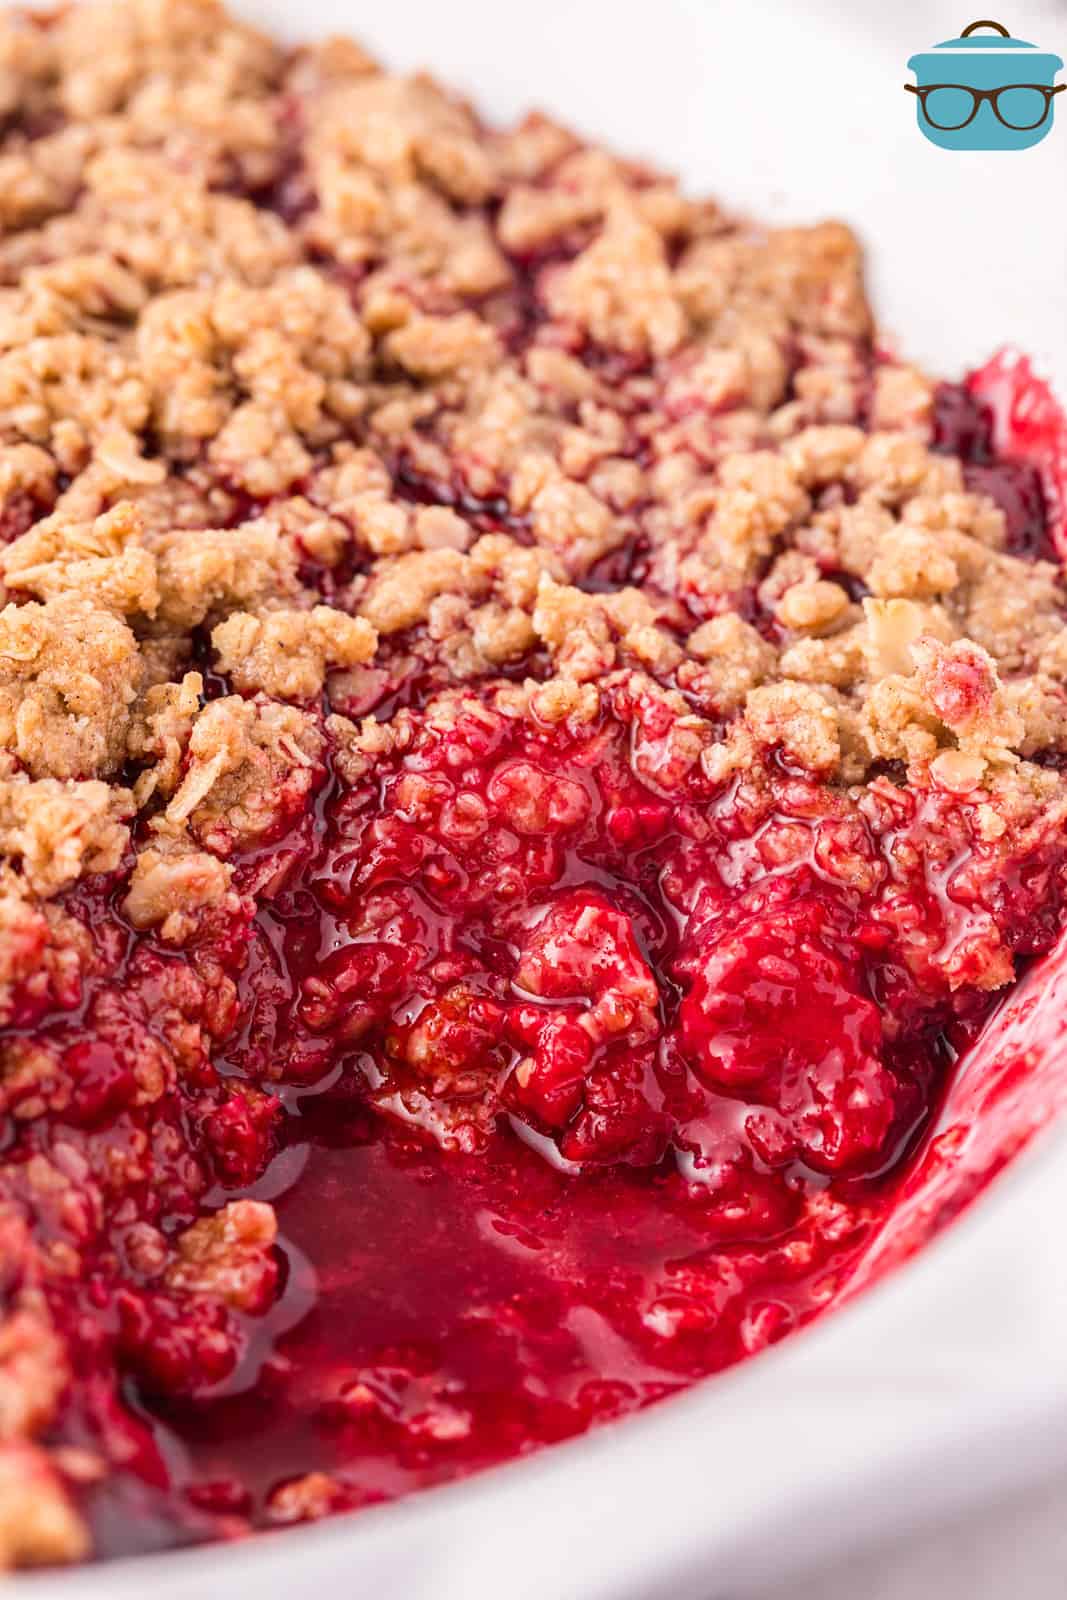 Looking down on a Raspberry Crumble with a scoop removed.